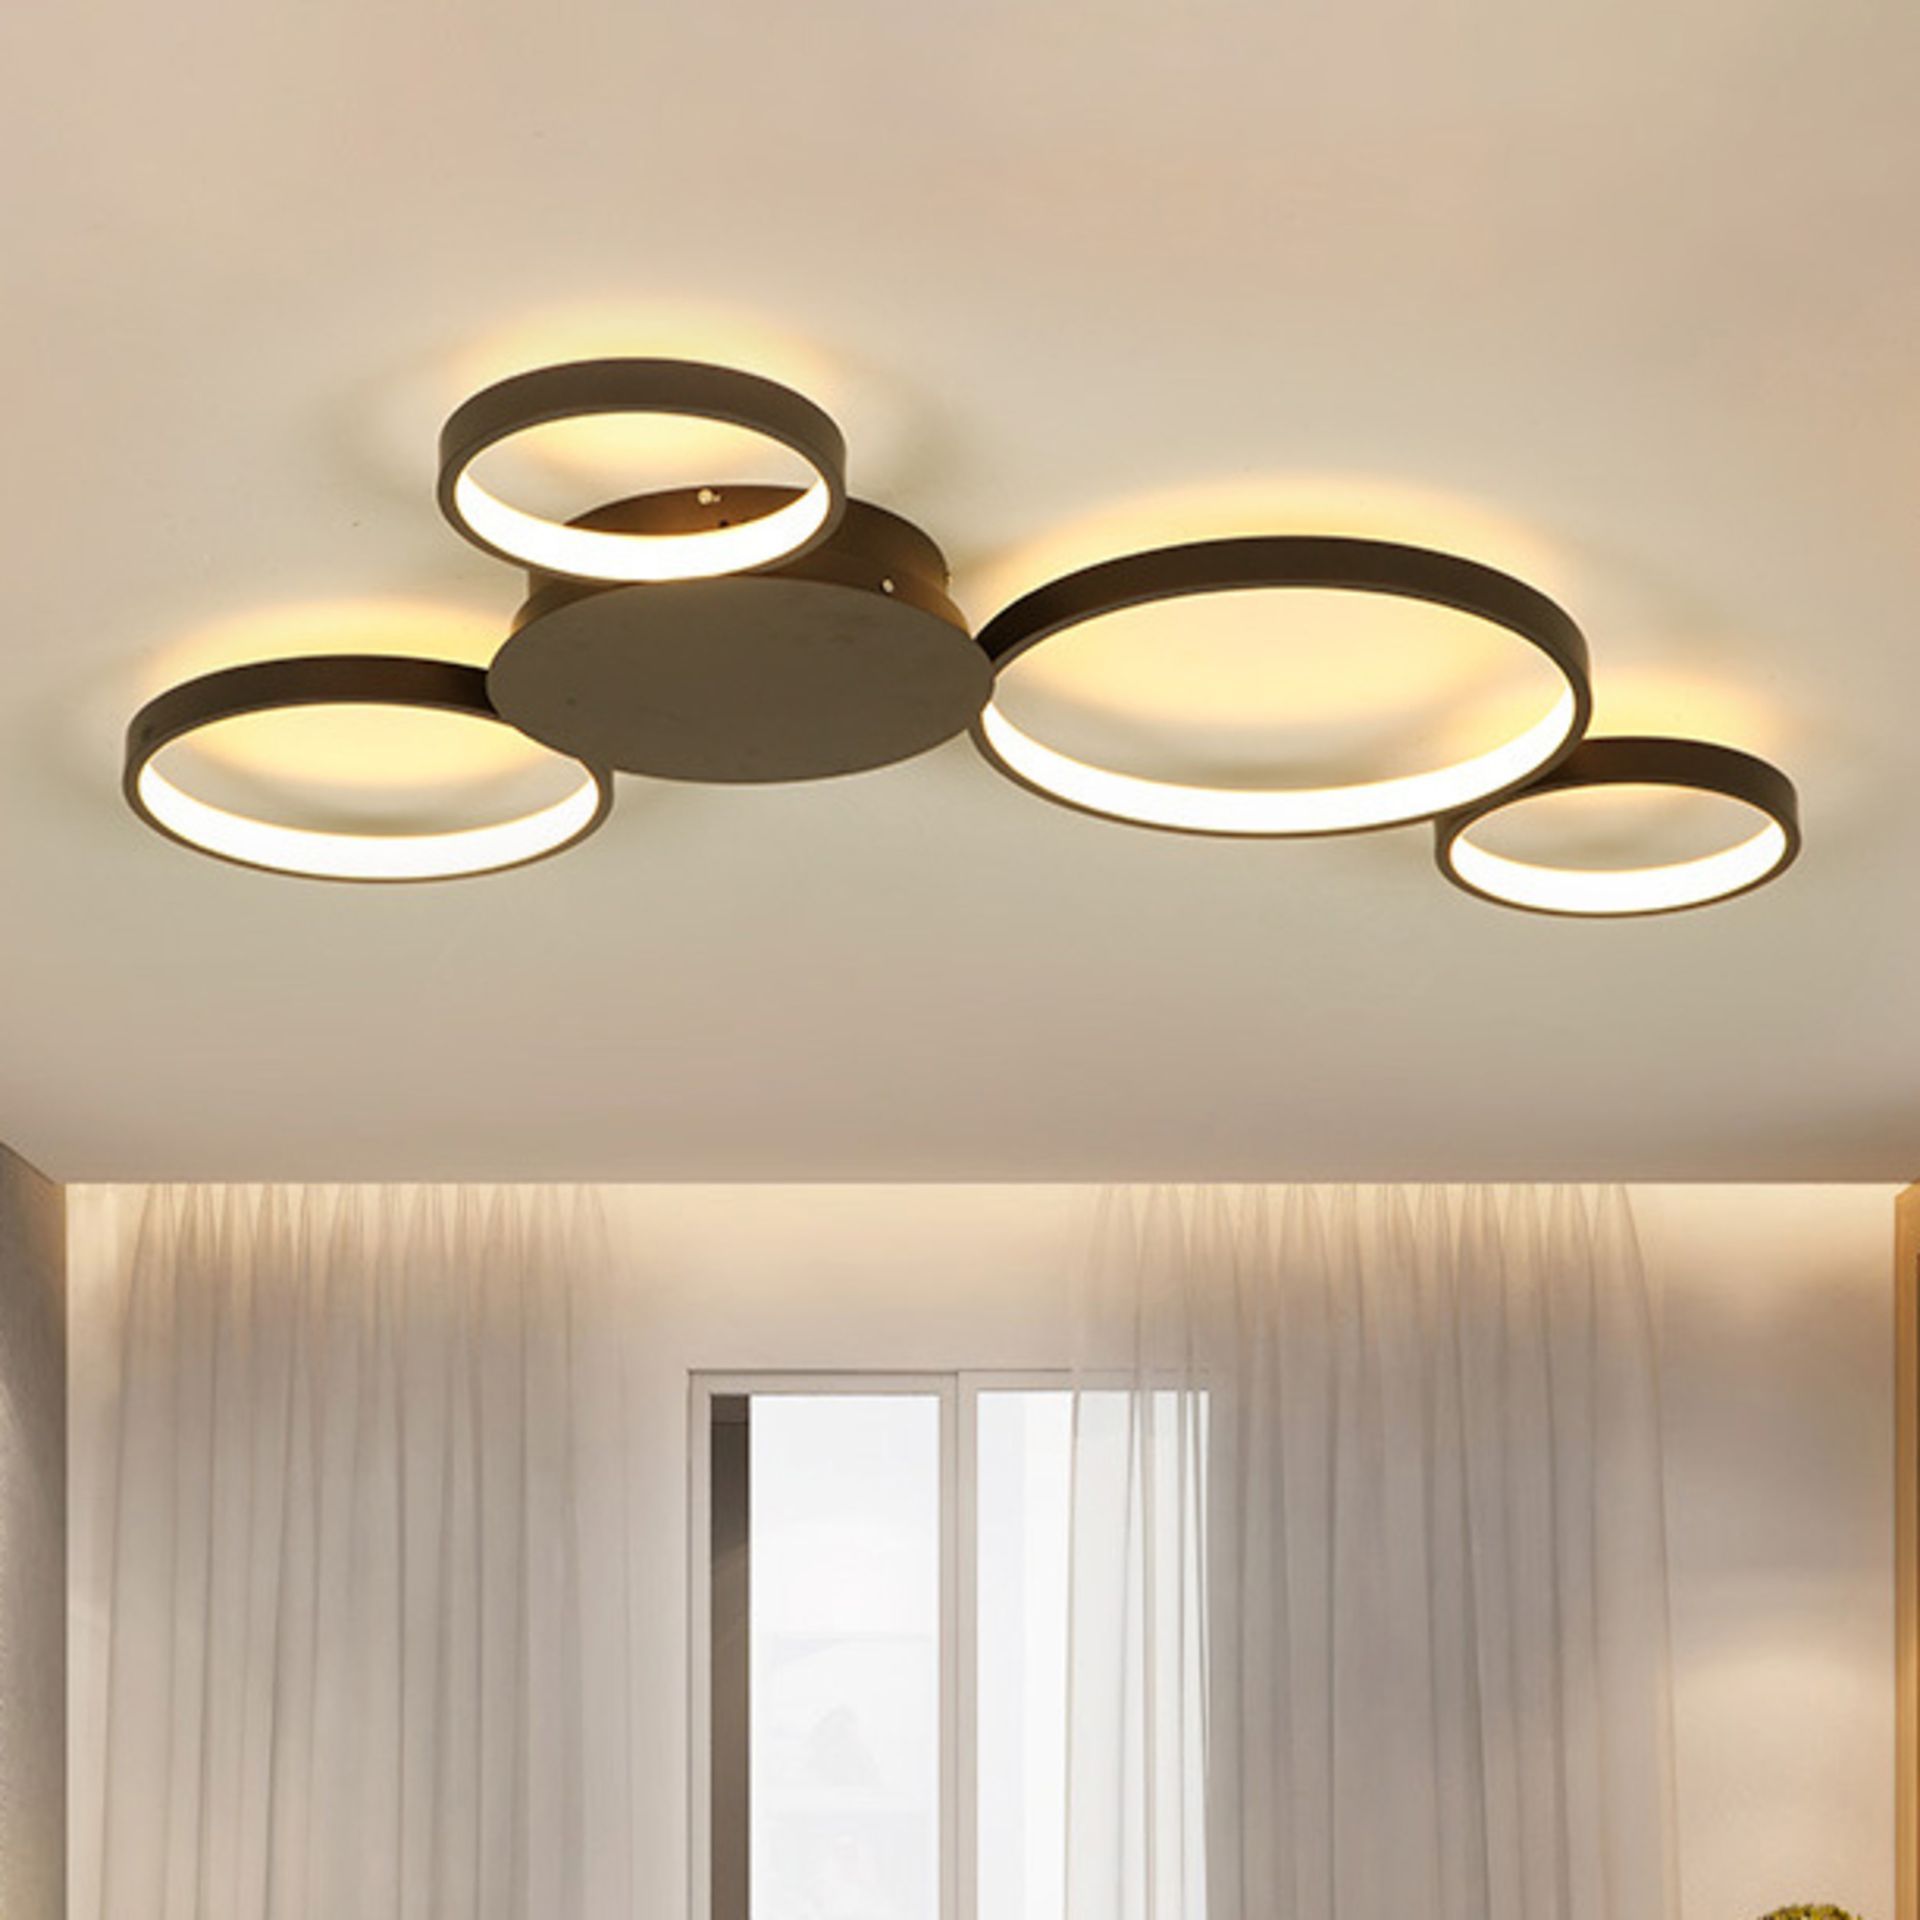 A ceiling light with three circles on it in a room.